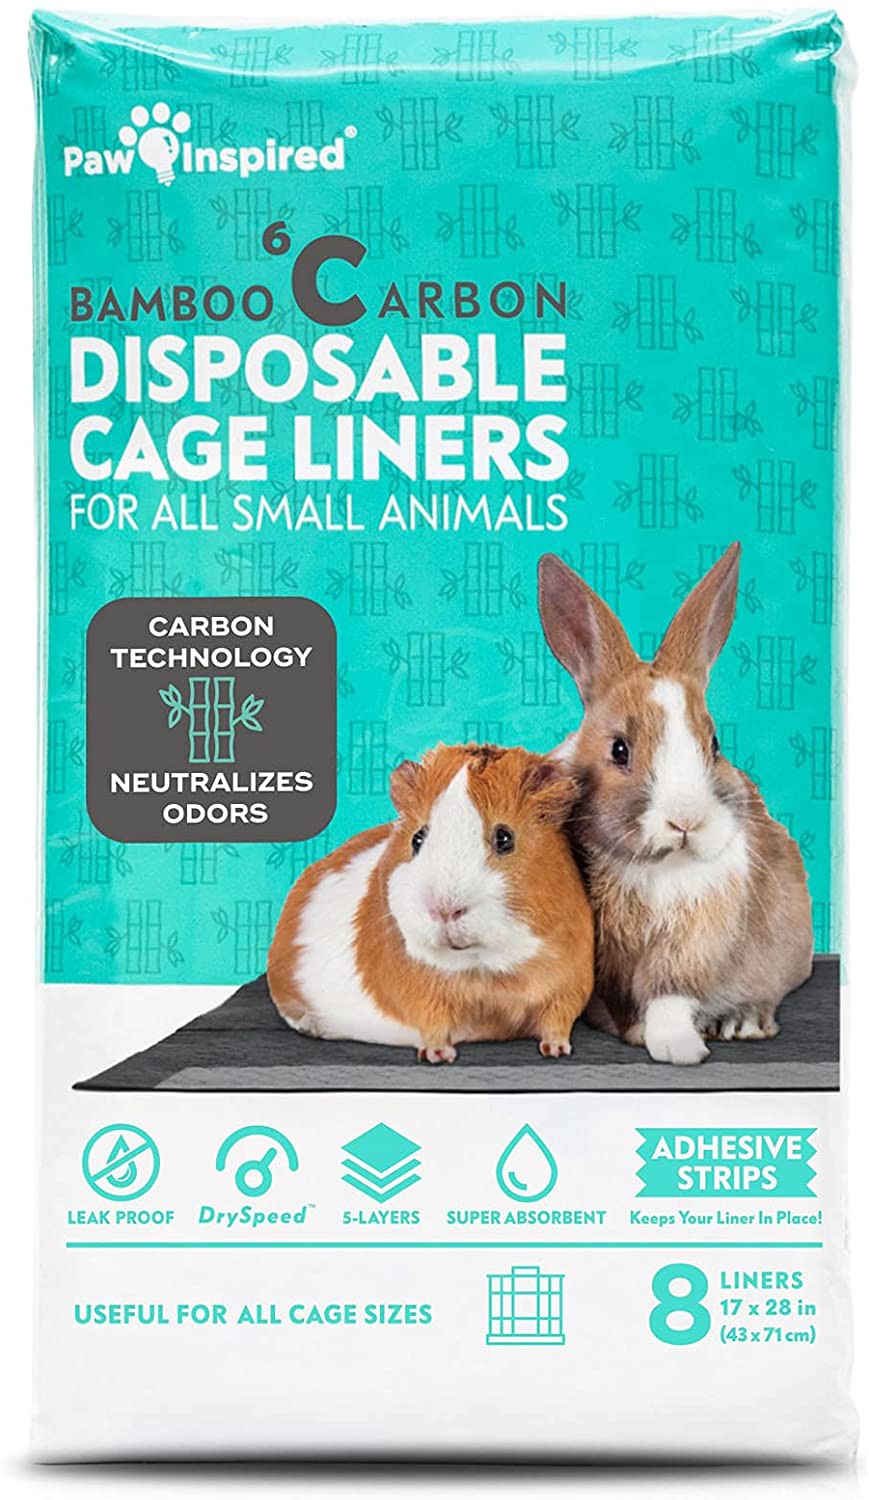 Paw Inspired Disposable Guinea Pig Cage Liners | Bamboo Charcoal Odor Controlling | Super Absorbent Liners Pee Pads for Ferrets, Rabbits, Hamsters, and Small Animals